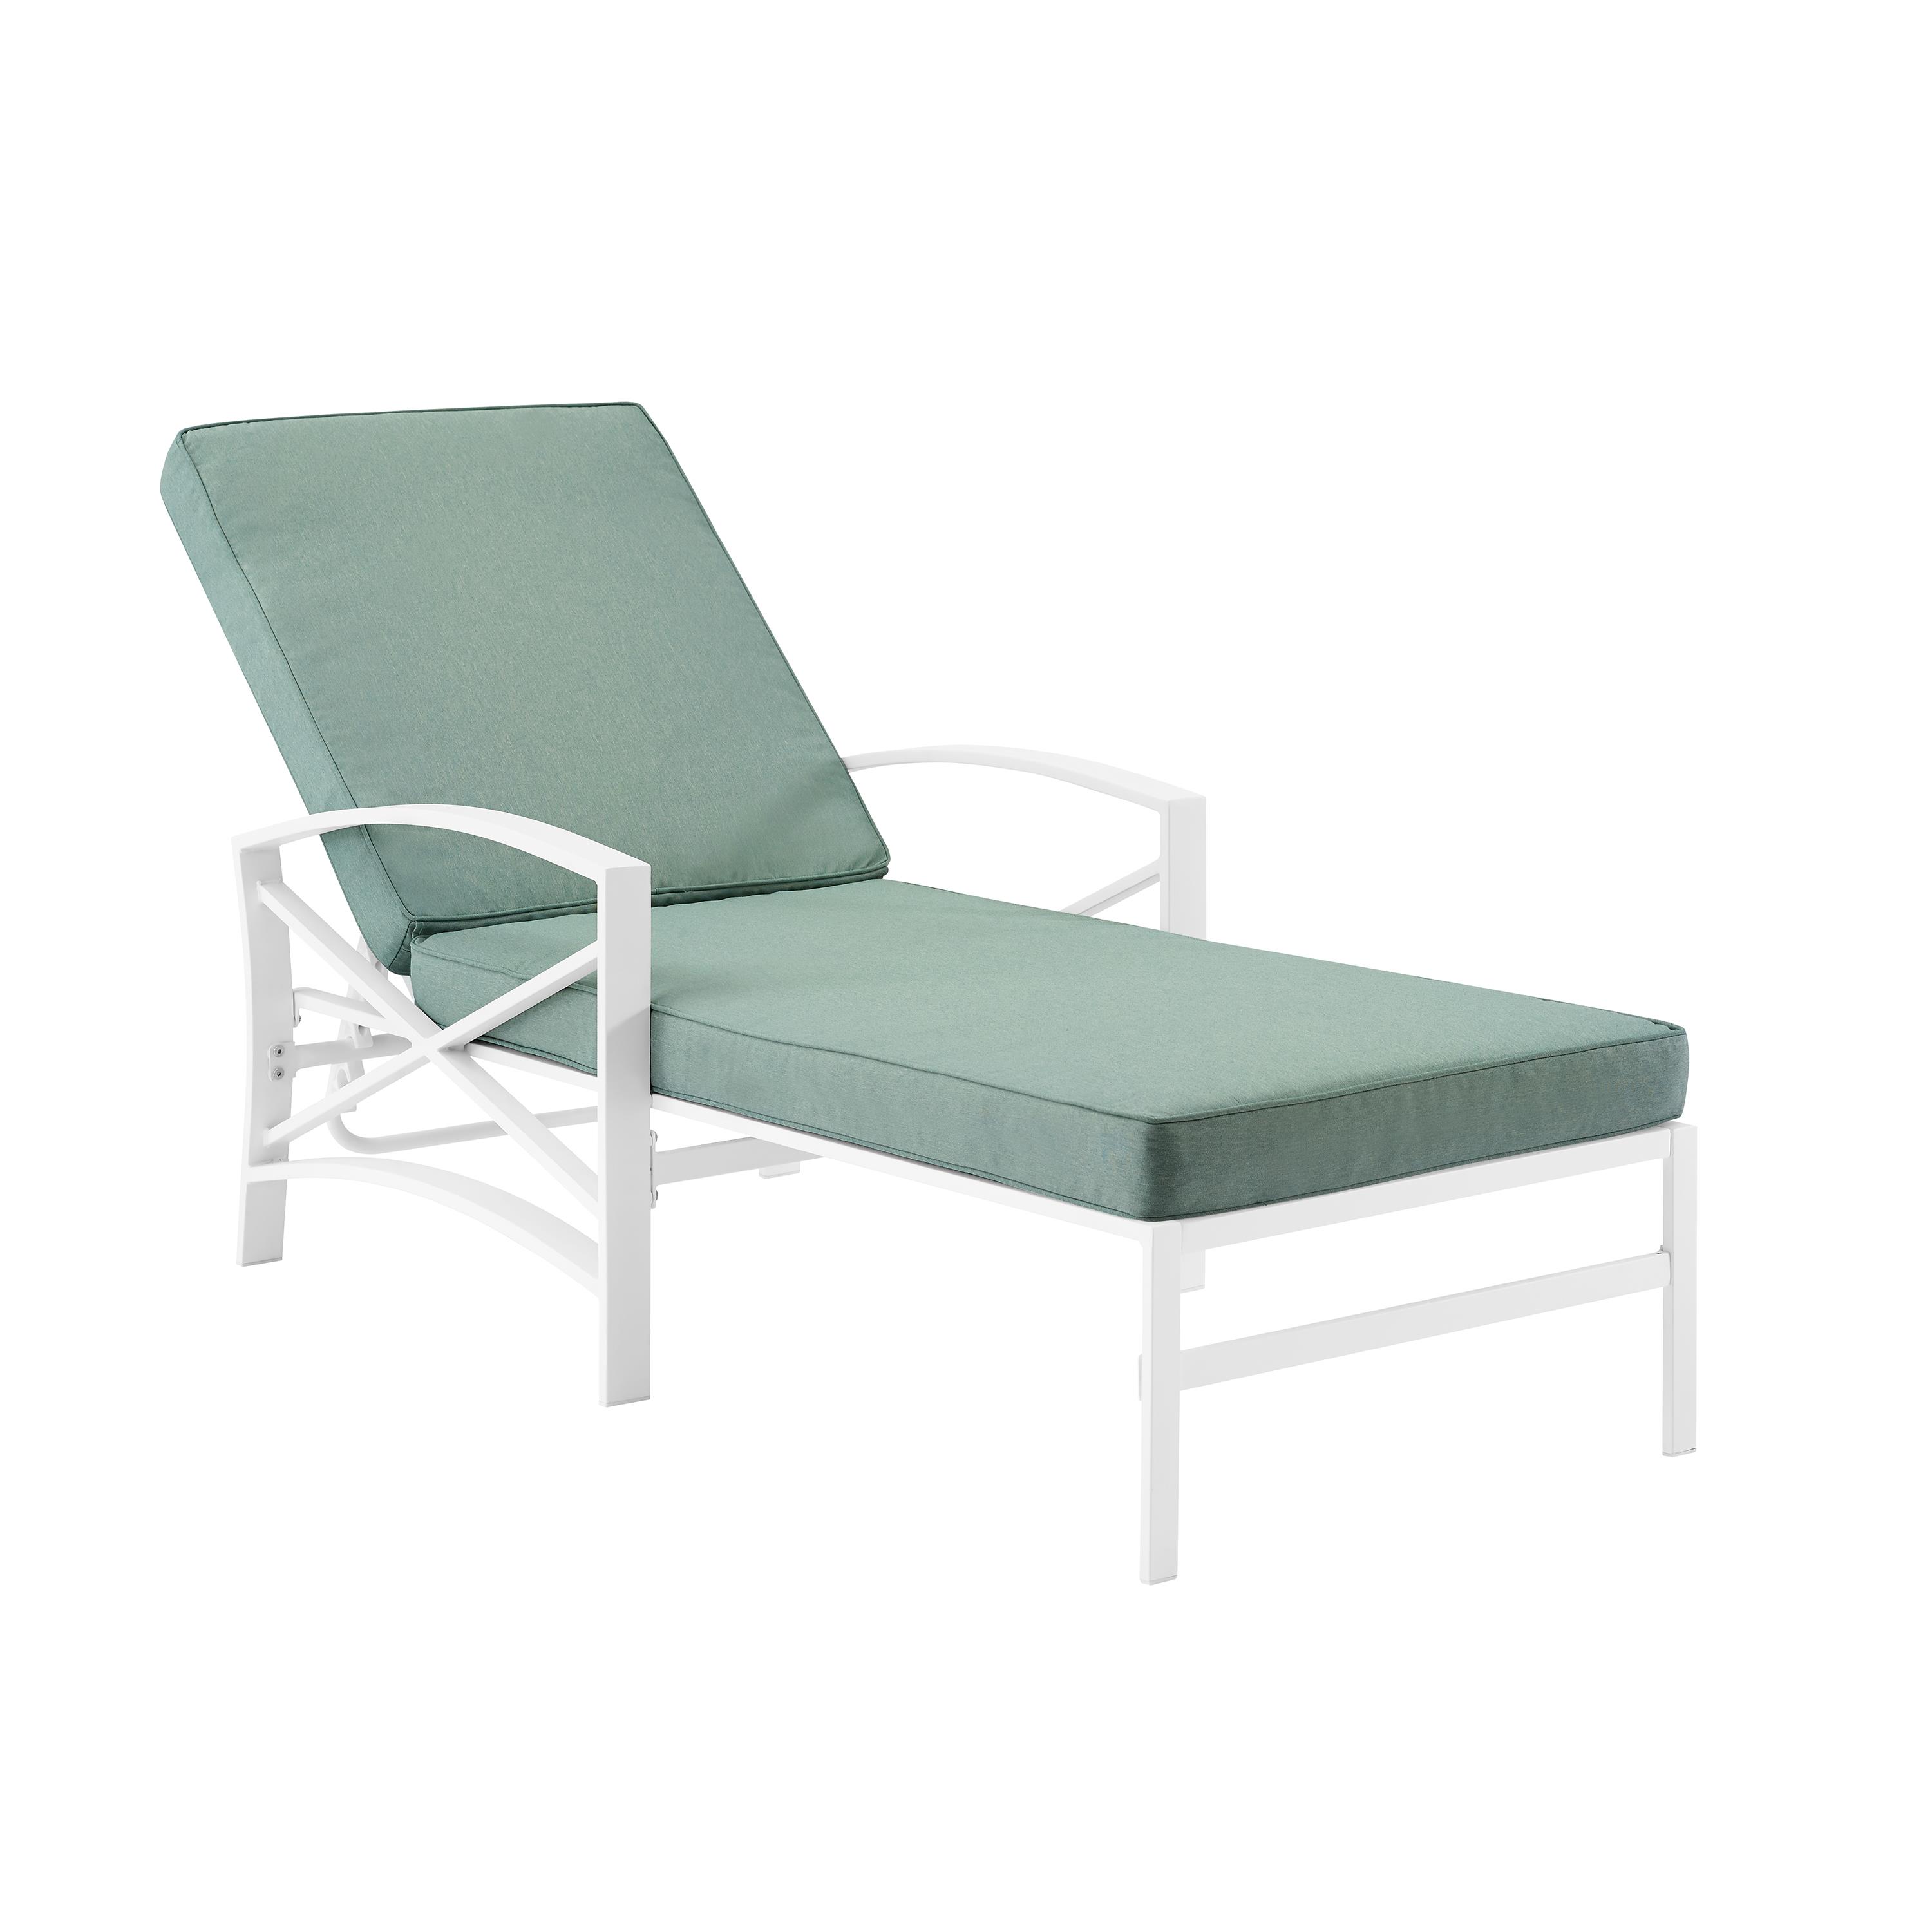 Crosley Kaplan Metal Patio Chaise Lounge in Mist and White - image 5 of 10